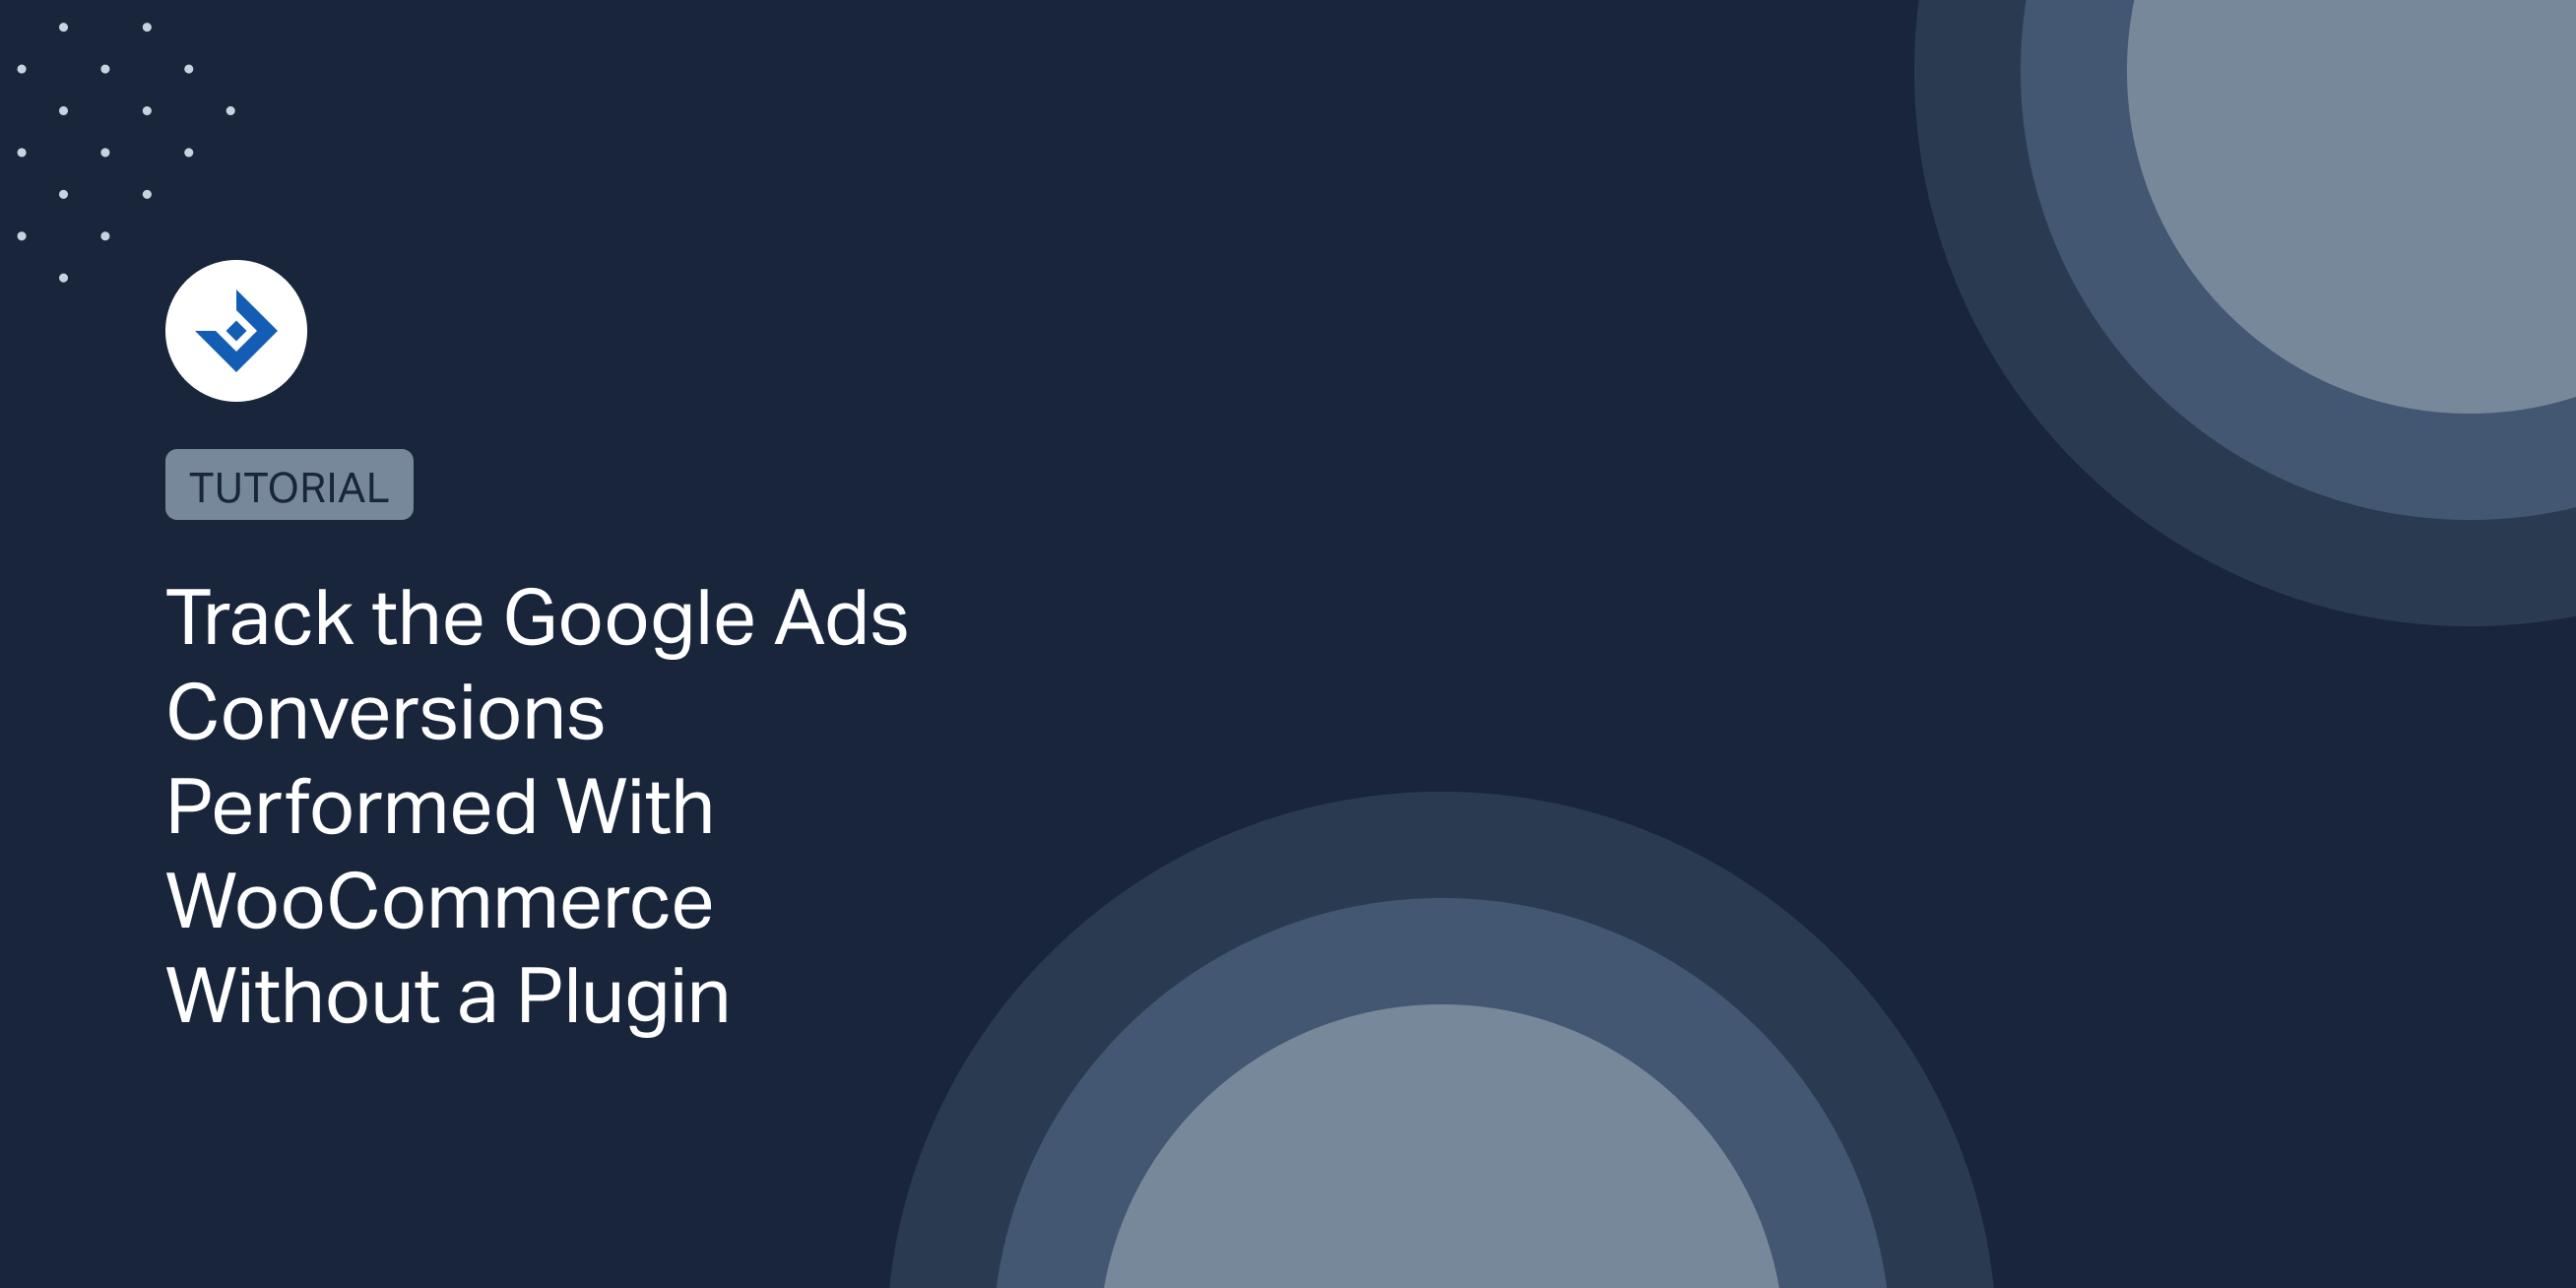 Track the Google Ads Conversions Performed With WooCommerce Without a Plugin